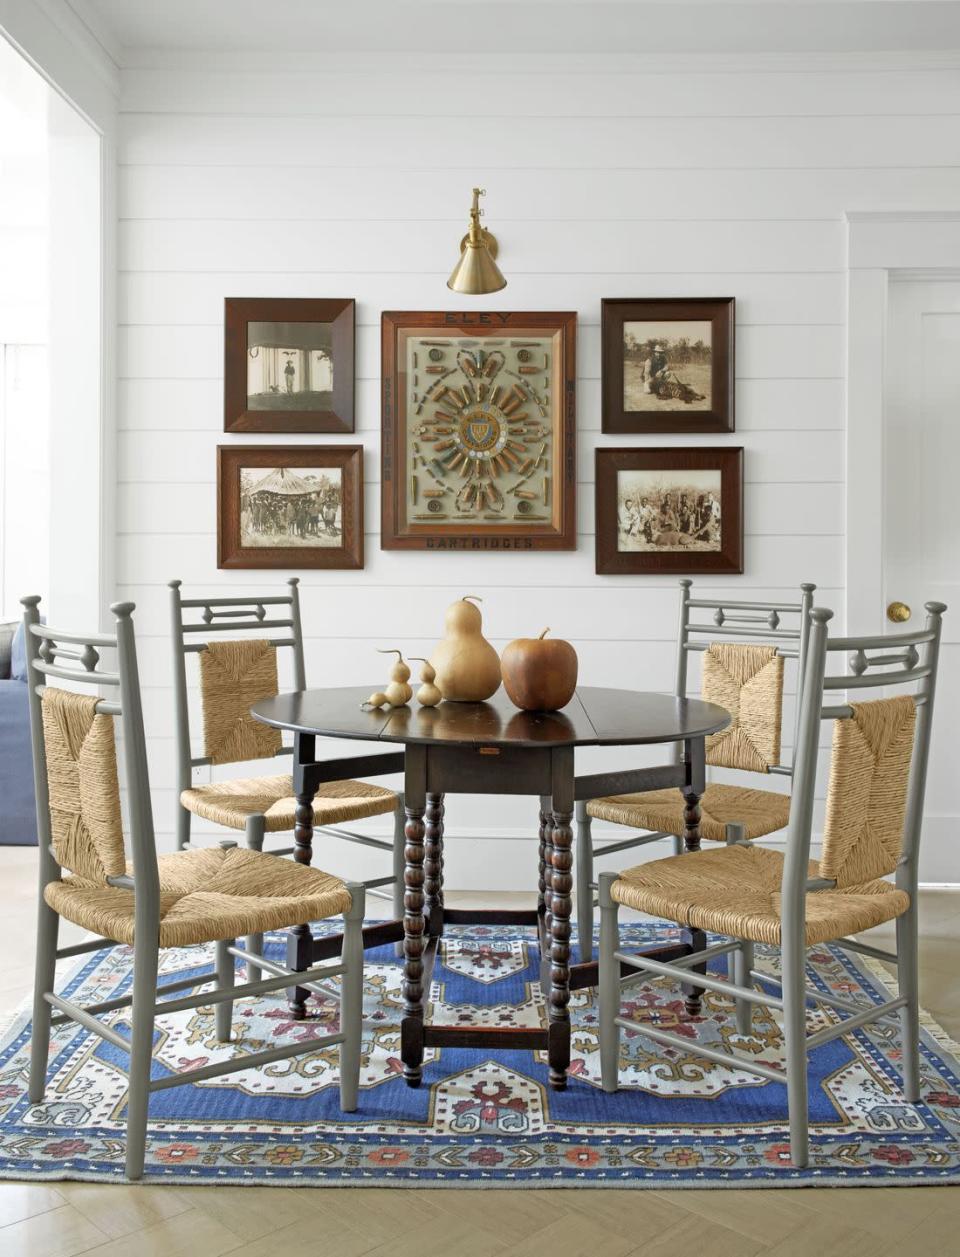 <p>The beauty of gray is that even when it's used subtly—as in the case with these painted chairs—it still stands out, especially when paired with bright colors like this cobalt blue Oushak rug. </p><p><a class="link " href="https://www.amazon.com/s?k=Blue+Moroccan+Rug&ref=nb_sb_noss&tag=syn-yahoo-20&ascsubtag=%5Bartid%7C10050.g.27891547%5Bsrc%7Cyahoo-us" rel="nofollow noopener" target="_blank" data-ylk="slk:SHOP BLUE RUGS">SHOP BLUE RUGS</a></p>